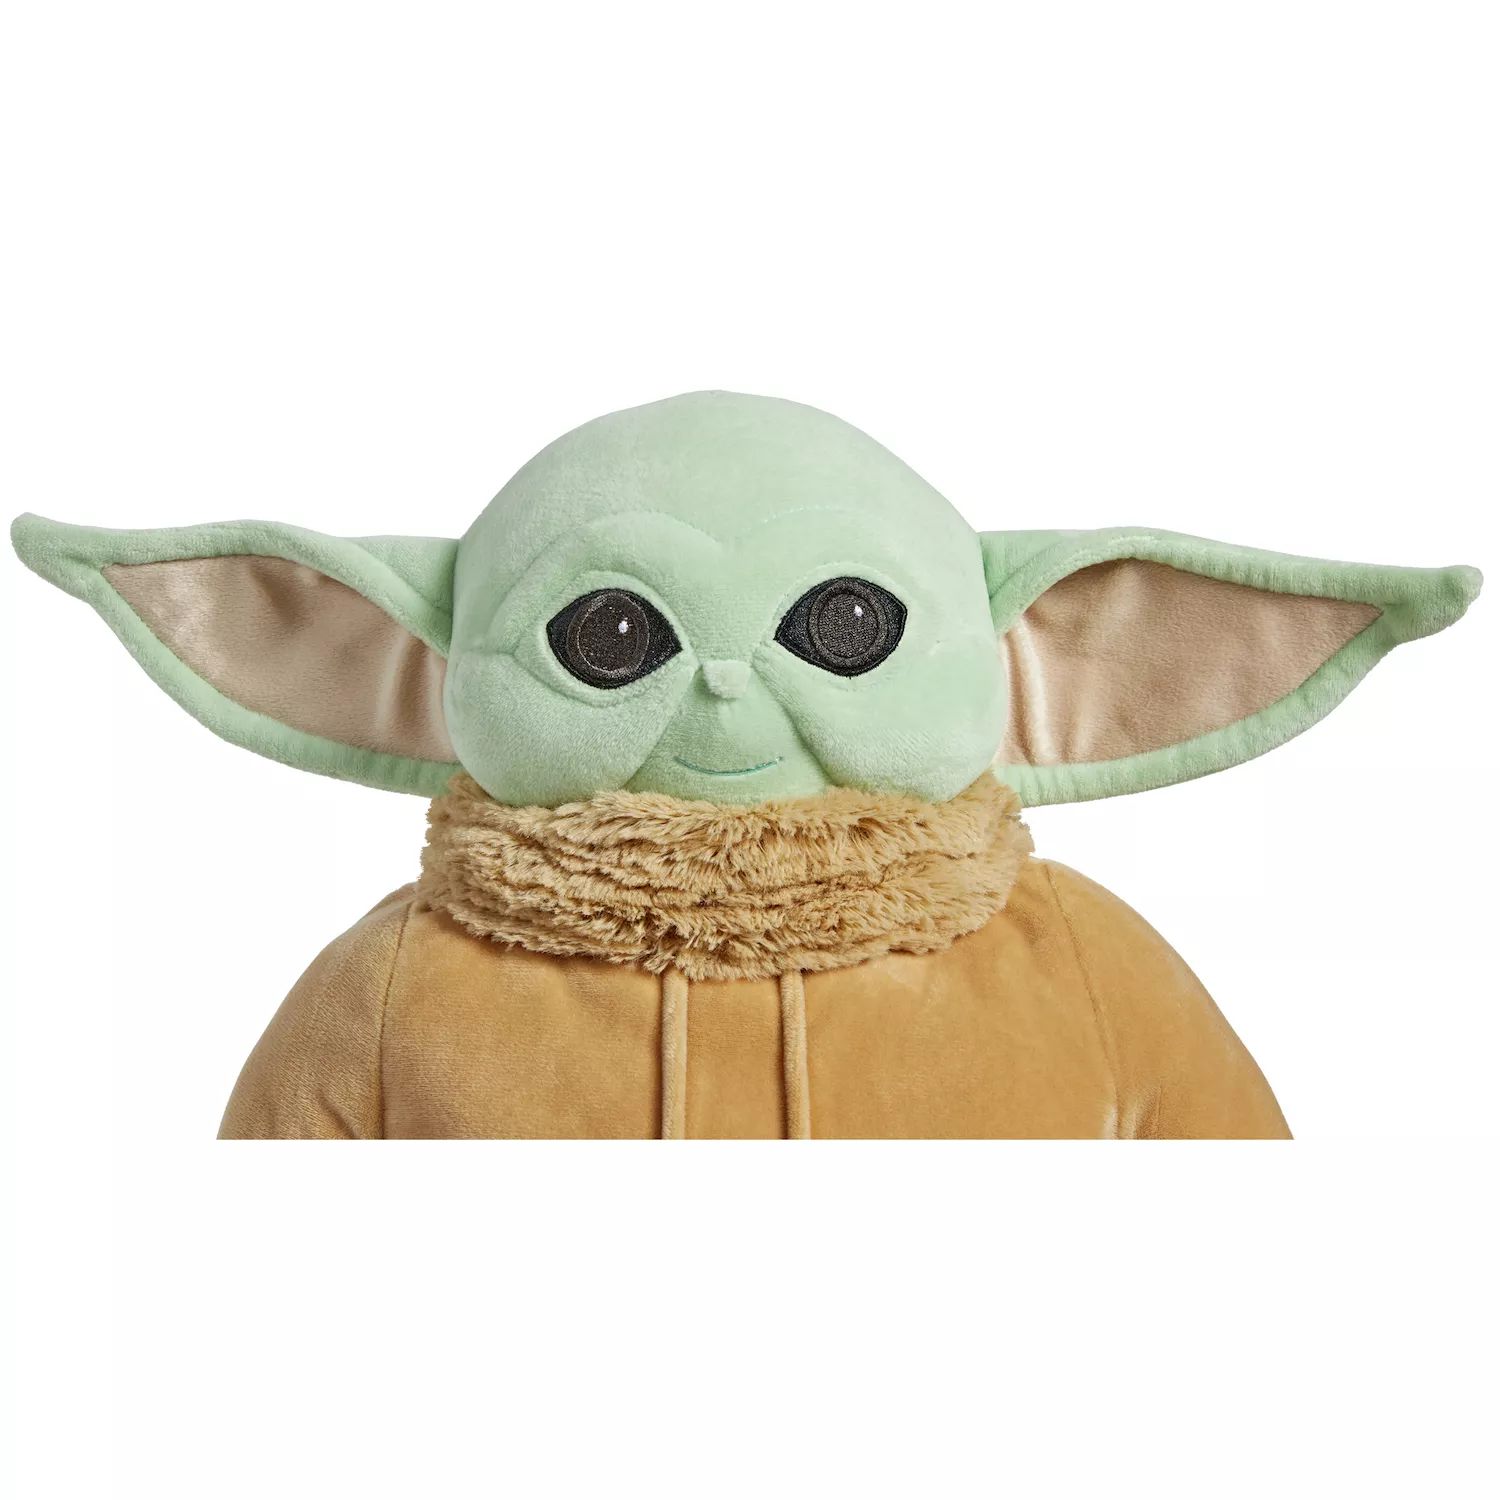 Disney Star Wars The Mandalorian Baby Yoda The Child Плюшевая игрушка от Pillow Pets Pillow Pets big pillow pillow hotel five star twisted flower pillow single pillow for bedroom 48 74cm